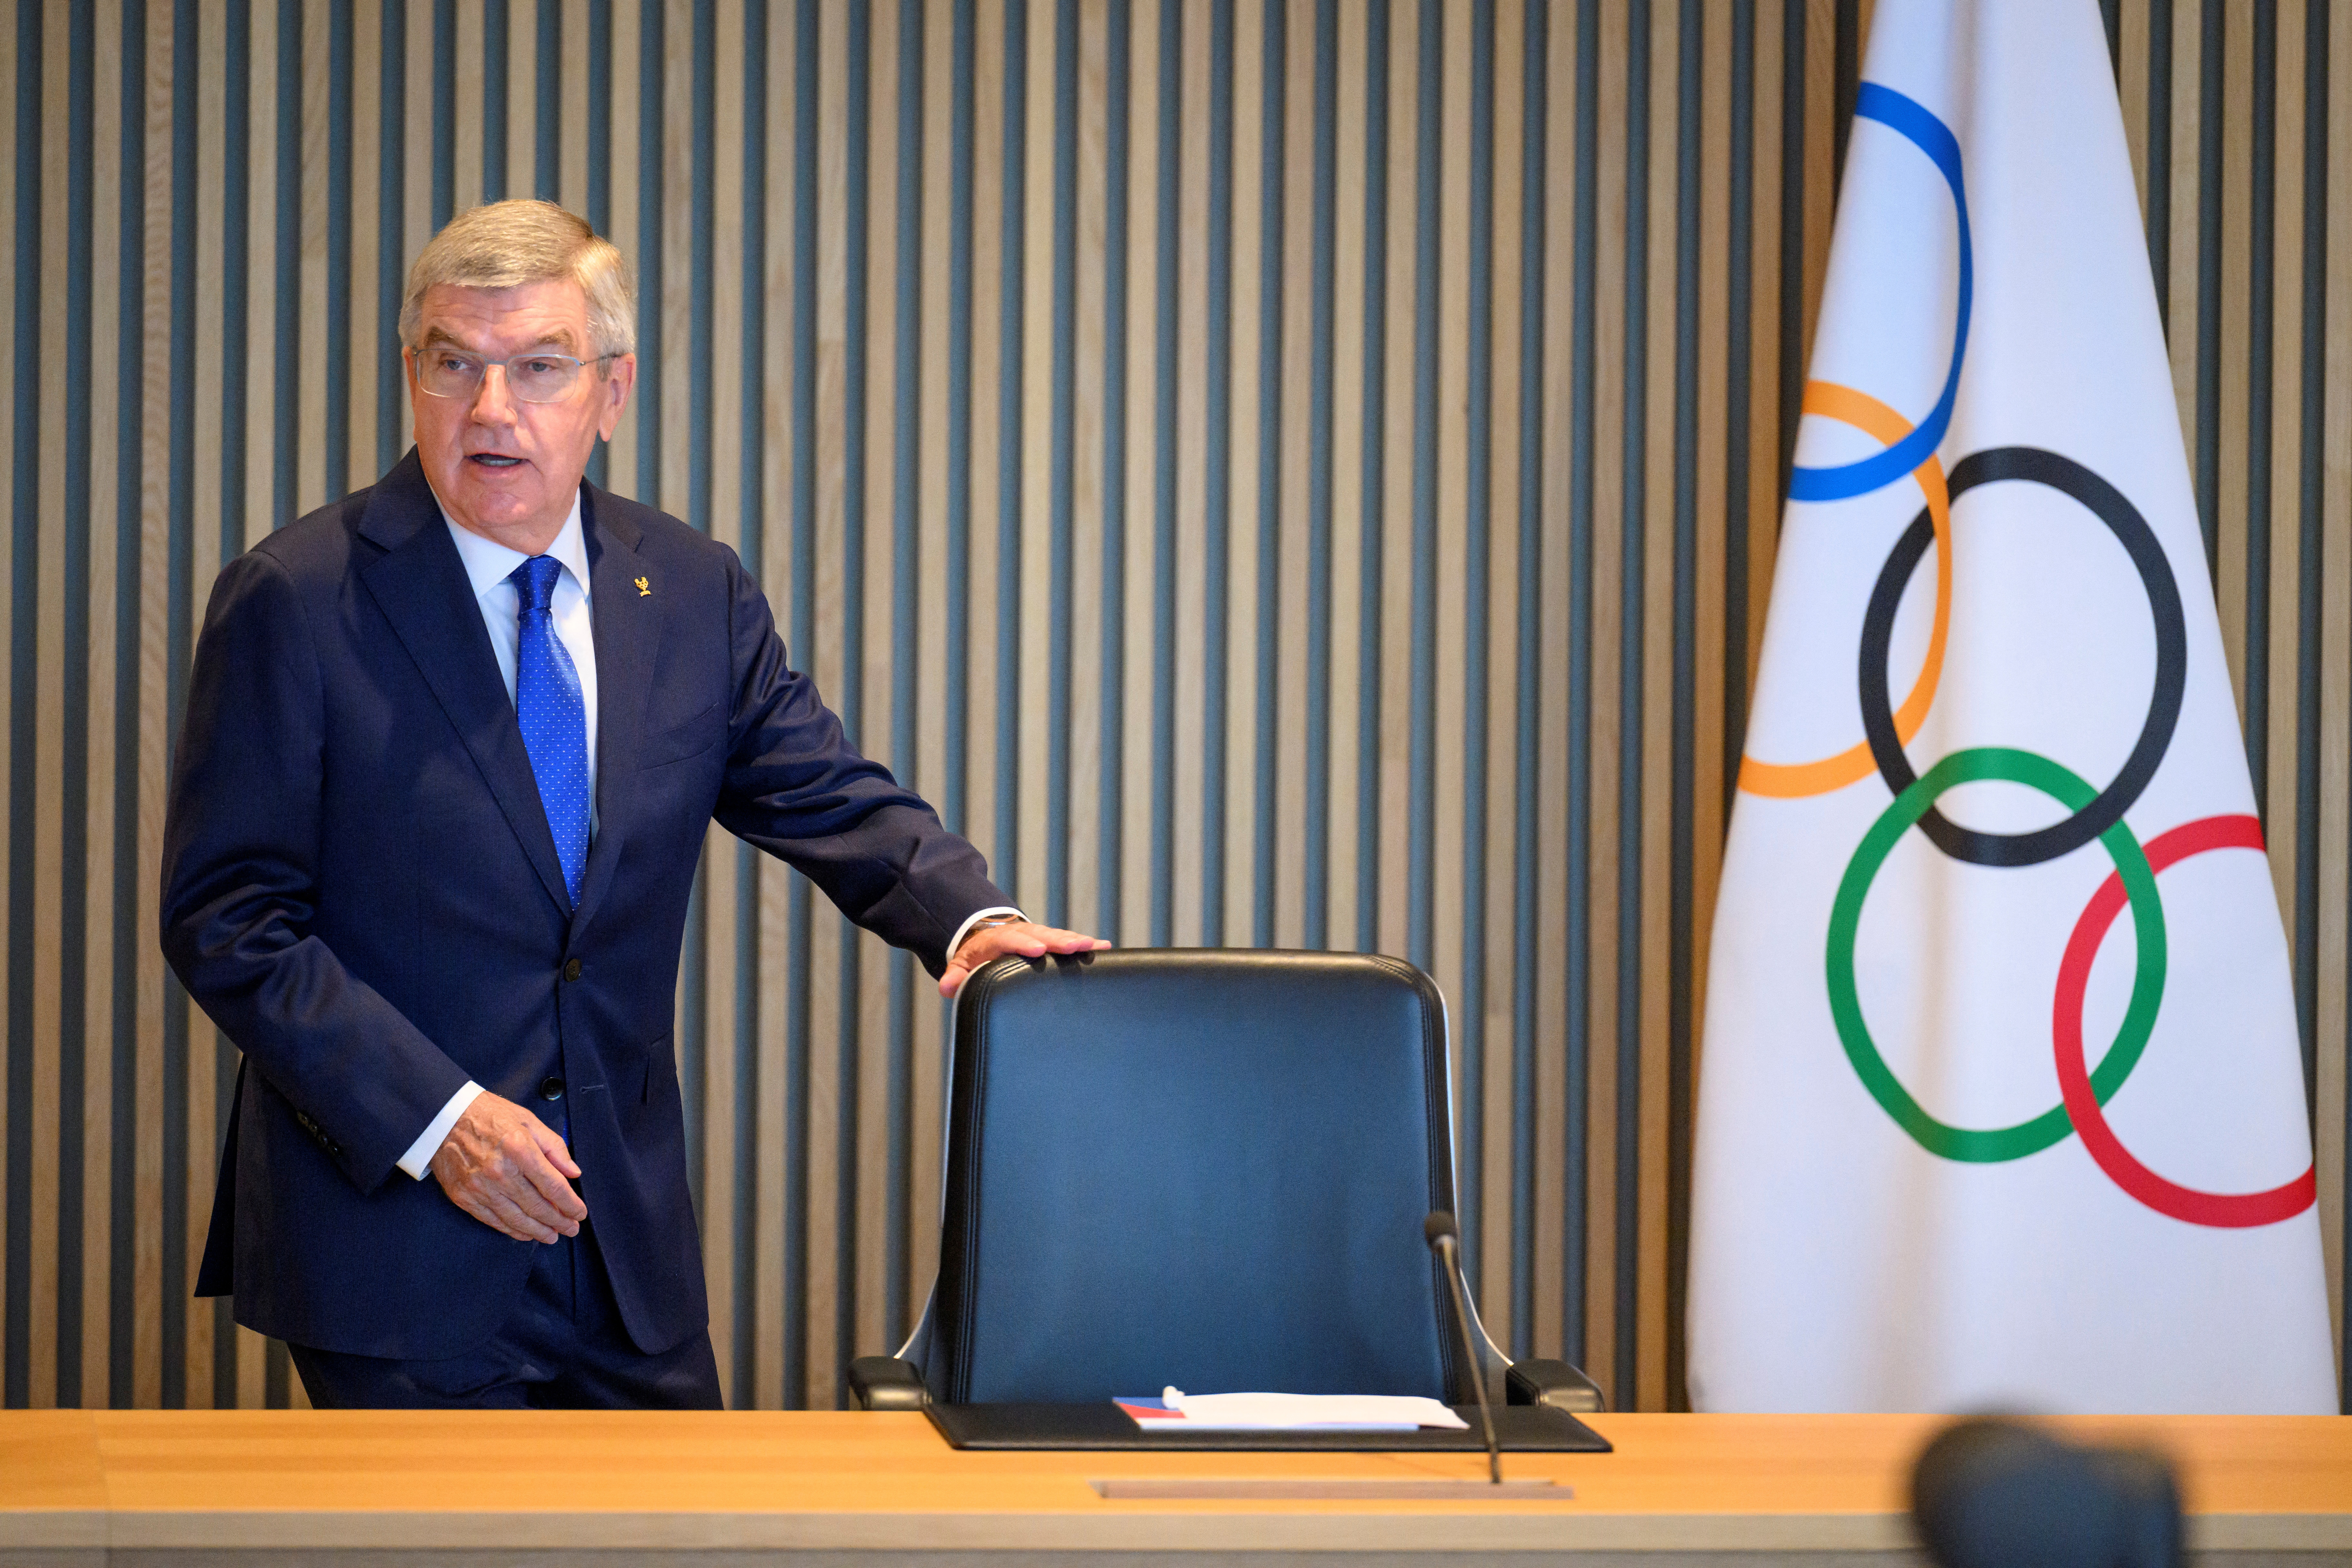 International Olympic Committee (IOC) President Thomas Bach speaks at the opening of the executive board meeting of the International Olympic Committee (IOC), at the Olympic House, in Lausanne, Switzerland September 8, 2022. Laurent Gillieron/Pool via REUTERS